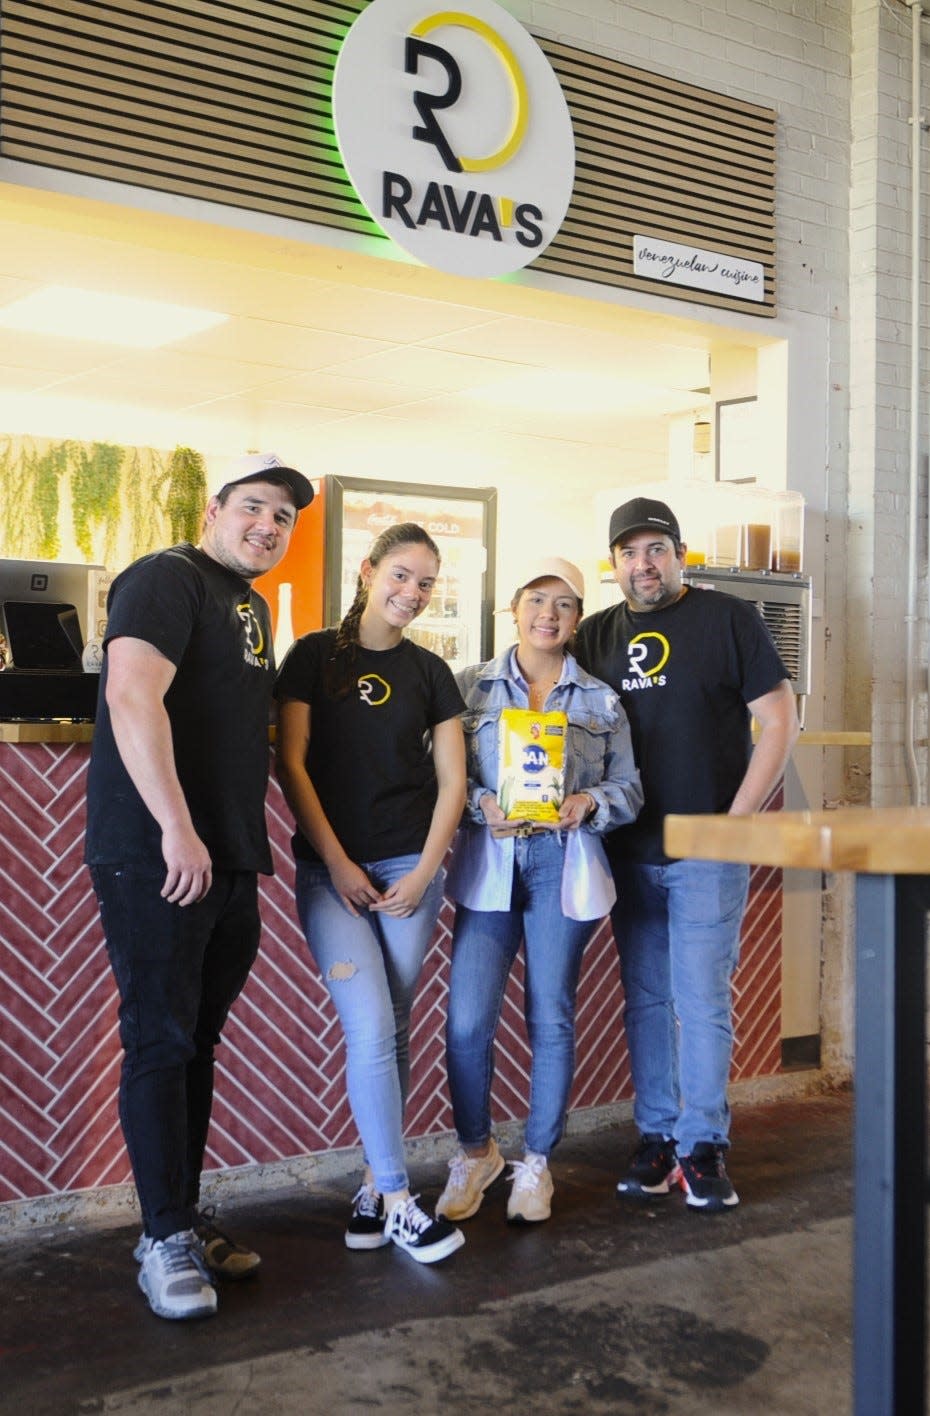 The Rava's team, from left: co-founder Andres Nava, Victoria Conil, and owners Emily Melean and Alexander Ramirez.